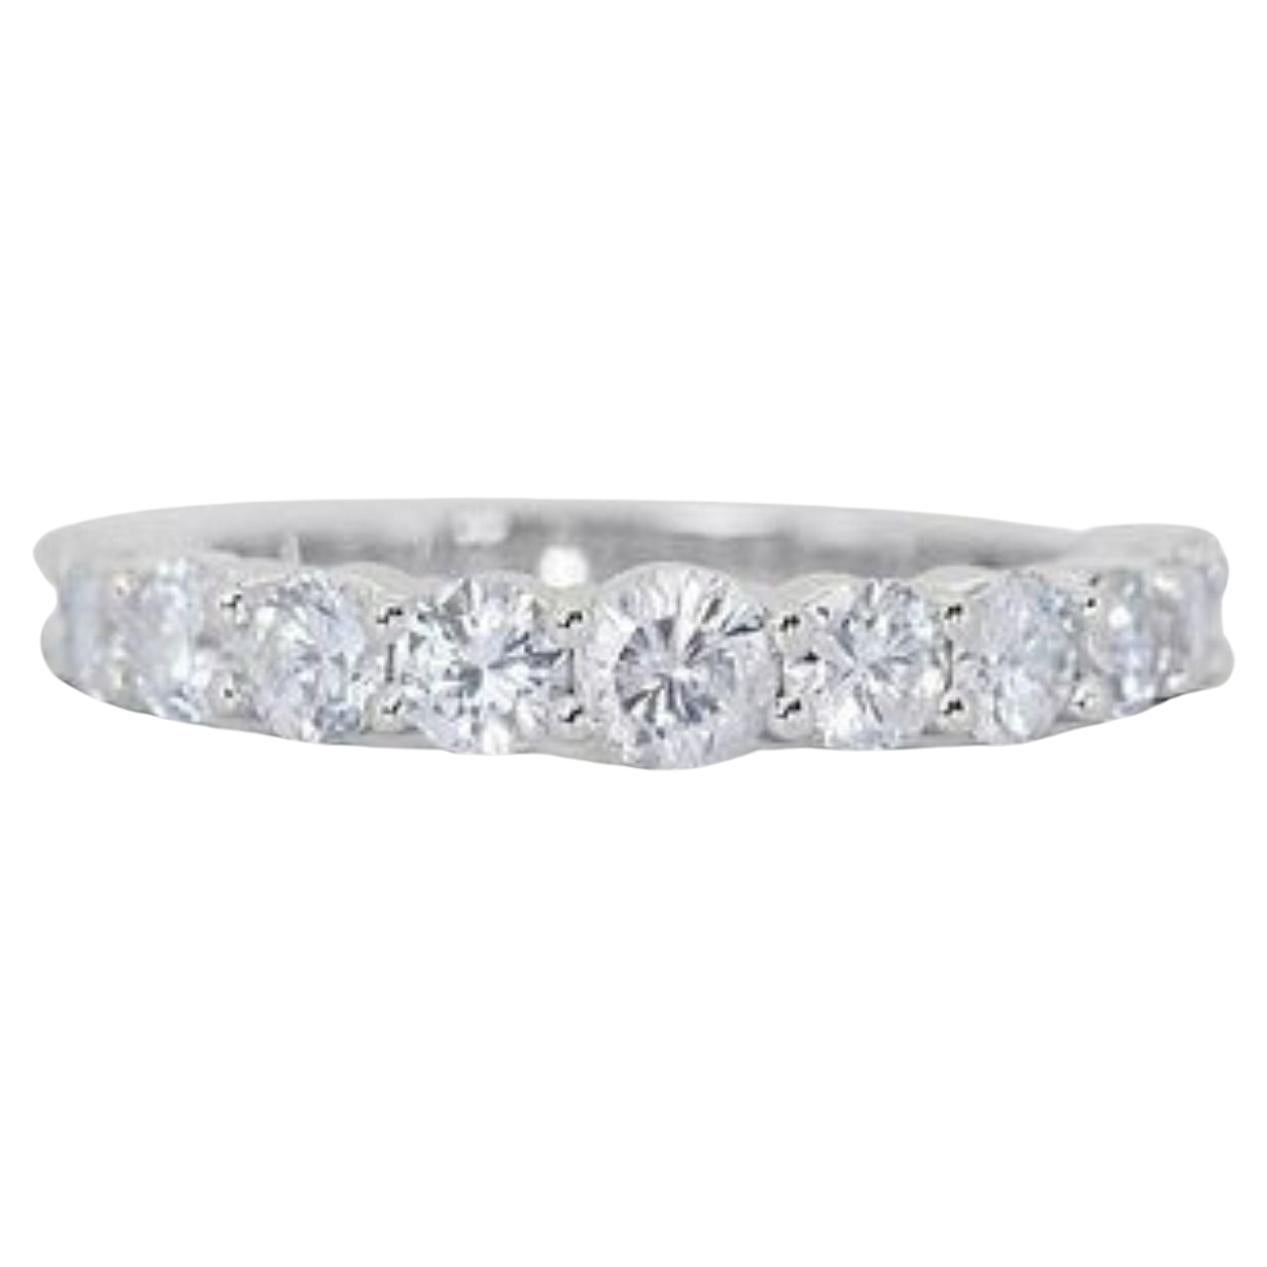 Stunning 1.58ct Round Brilliant Diamond Ring in 14k White Gold For Sale